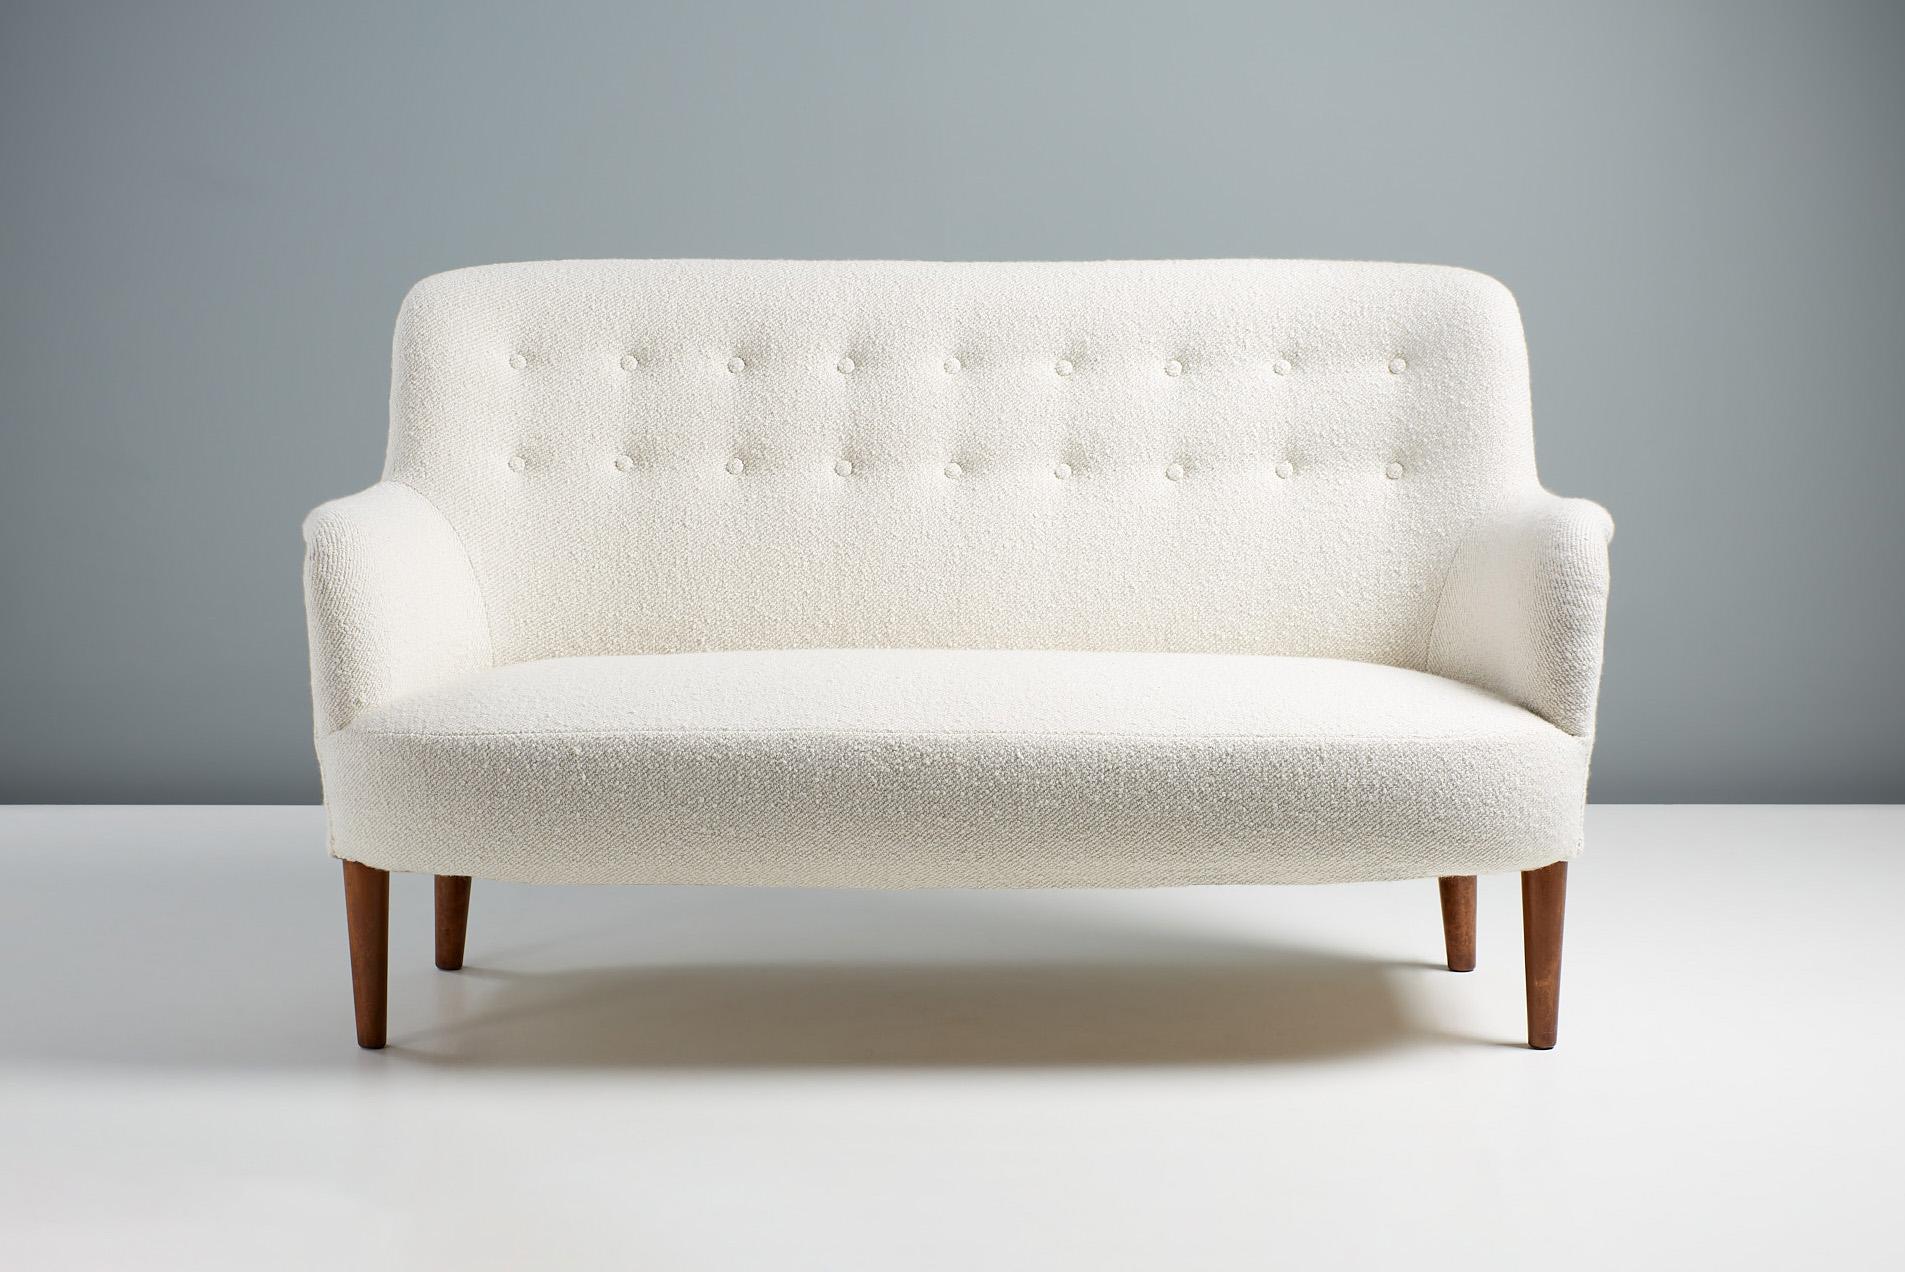 Carl Malmsten - Sofa, c1950s.

Small sofa designed in the 1950s by Swedish master-designer Carl Malmsten and produced by his own company in Sweden. The sofa has been restored and re-finished with oiled elm wood legs. It has been reupholstered in